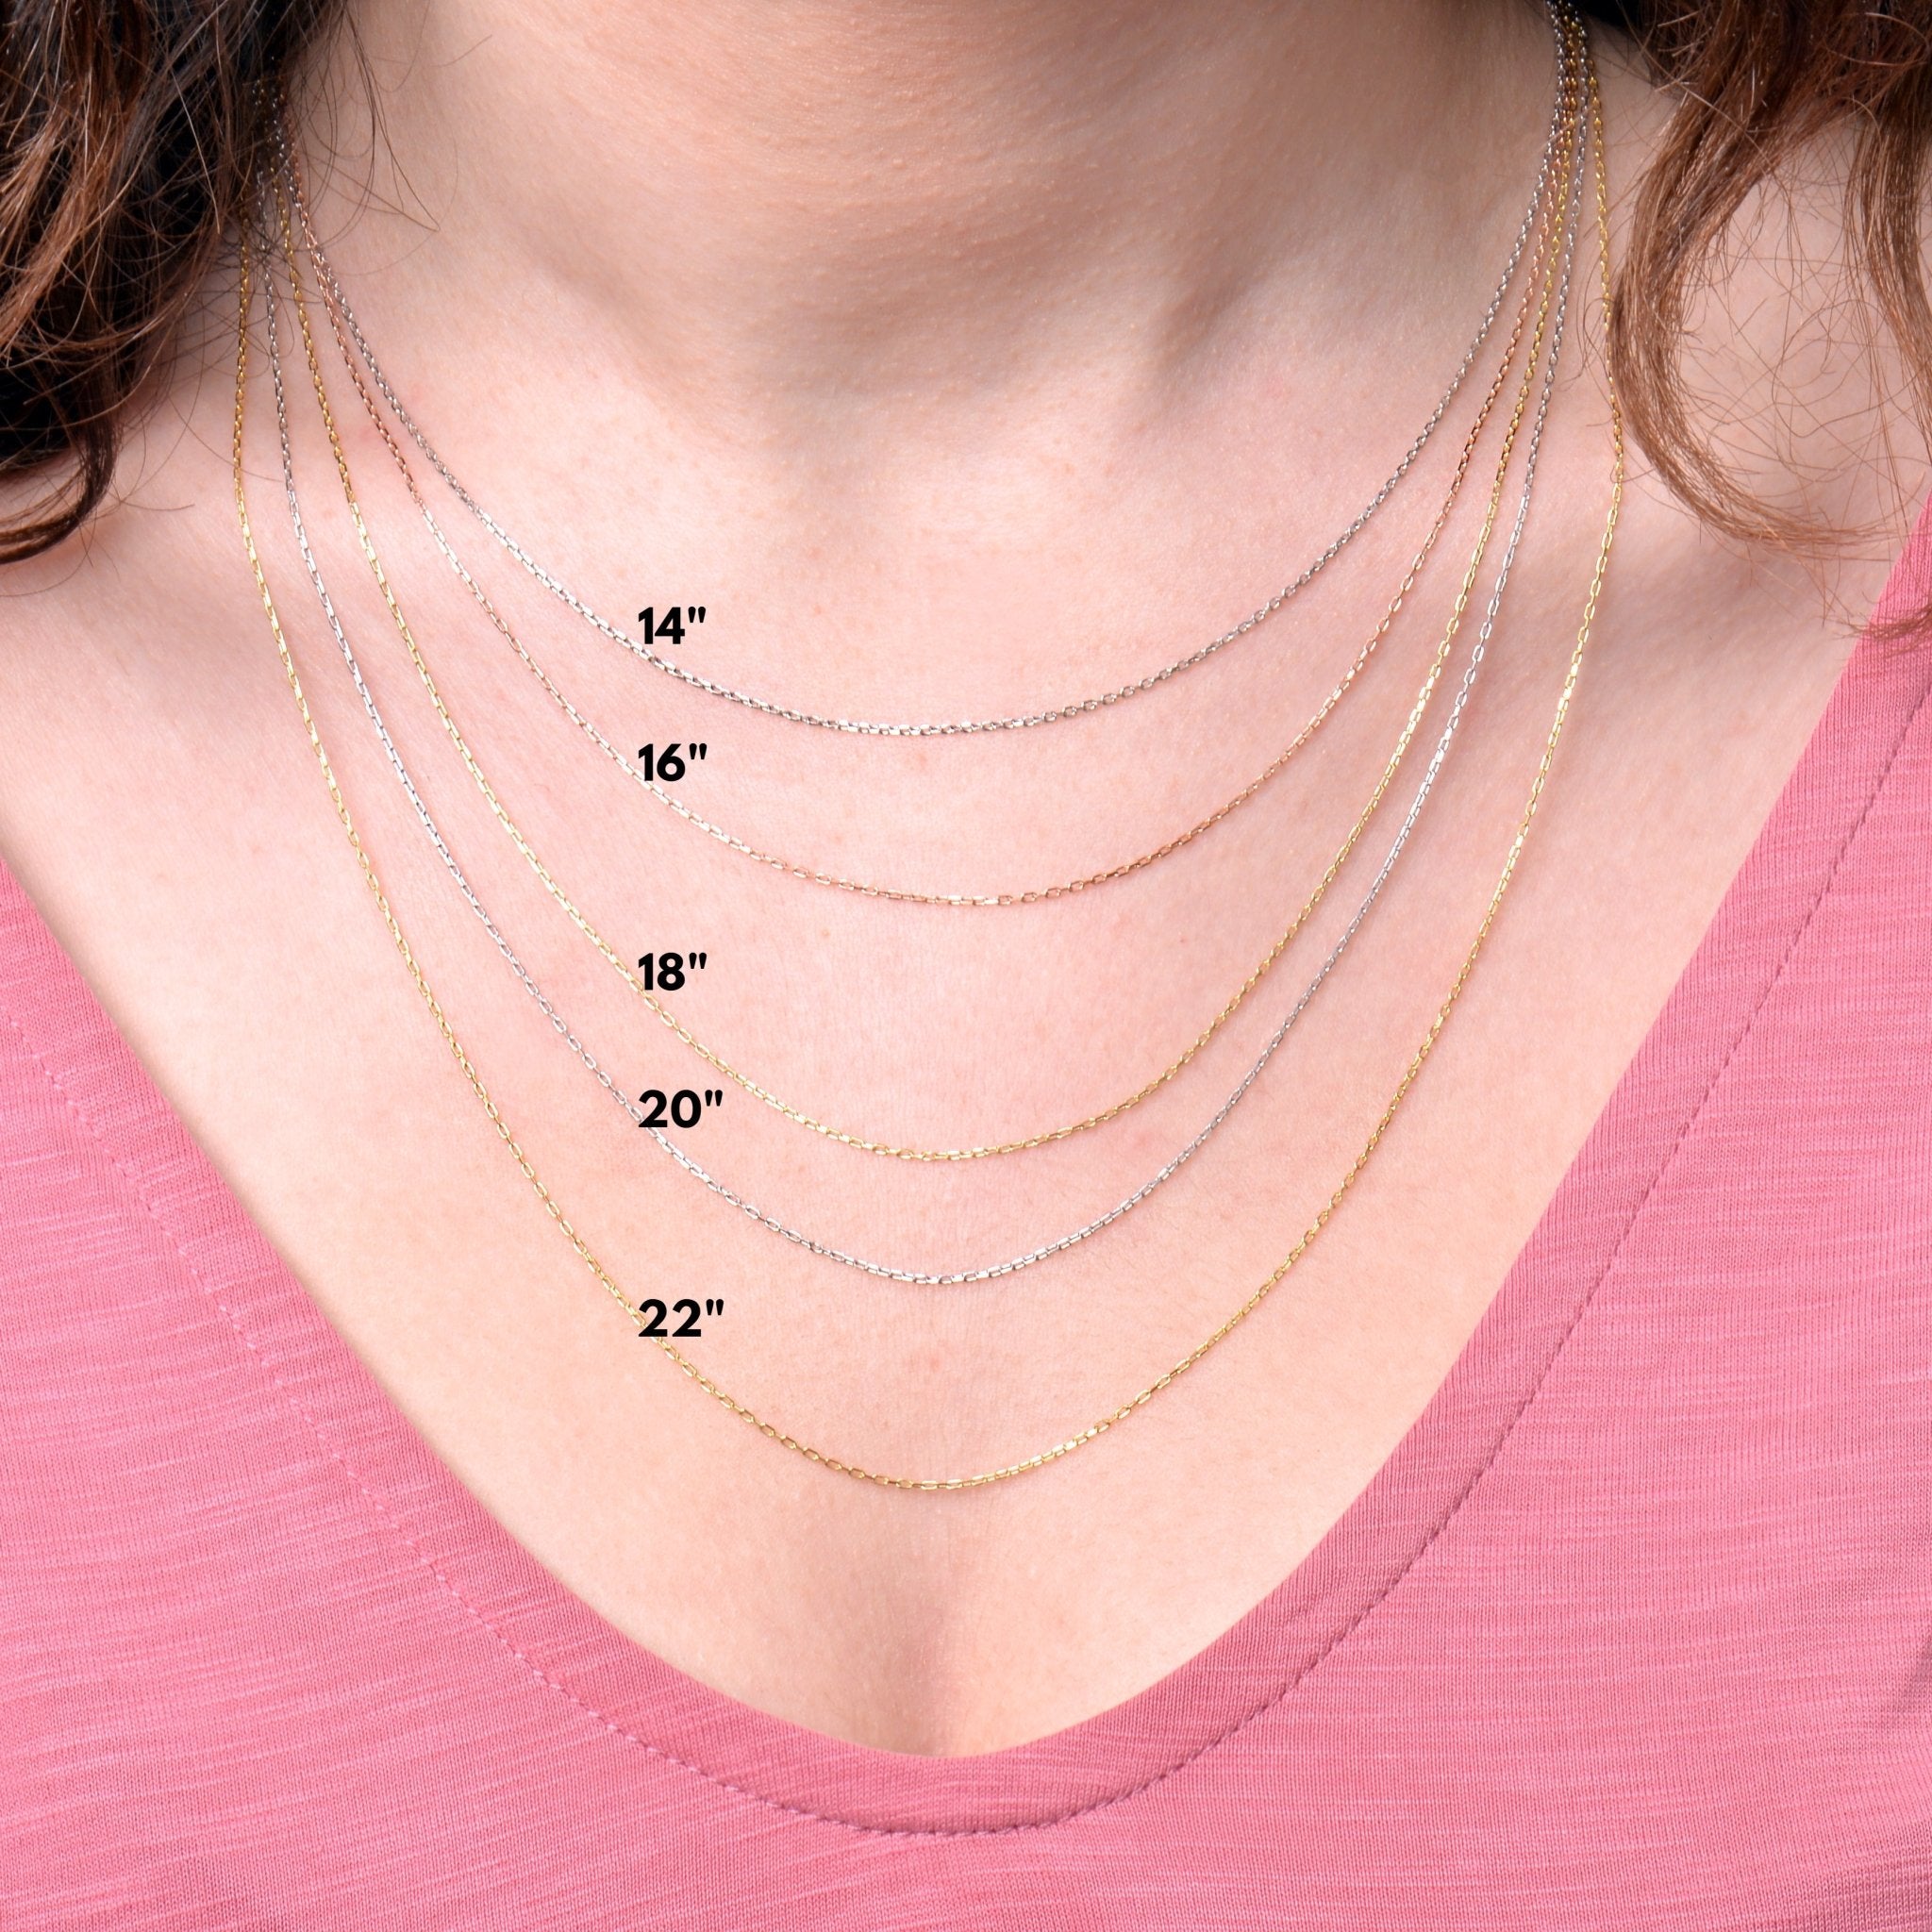 Jewelry Necklace Length from 14'' to 20''